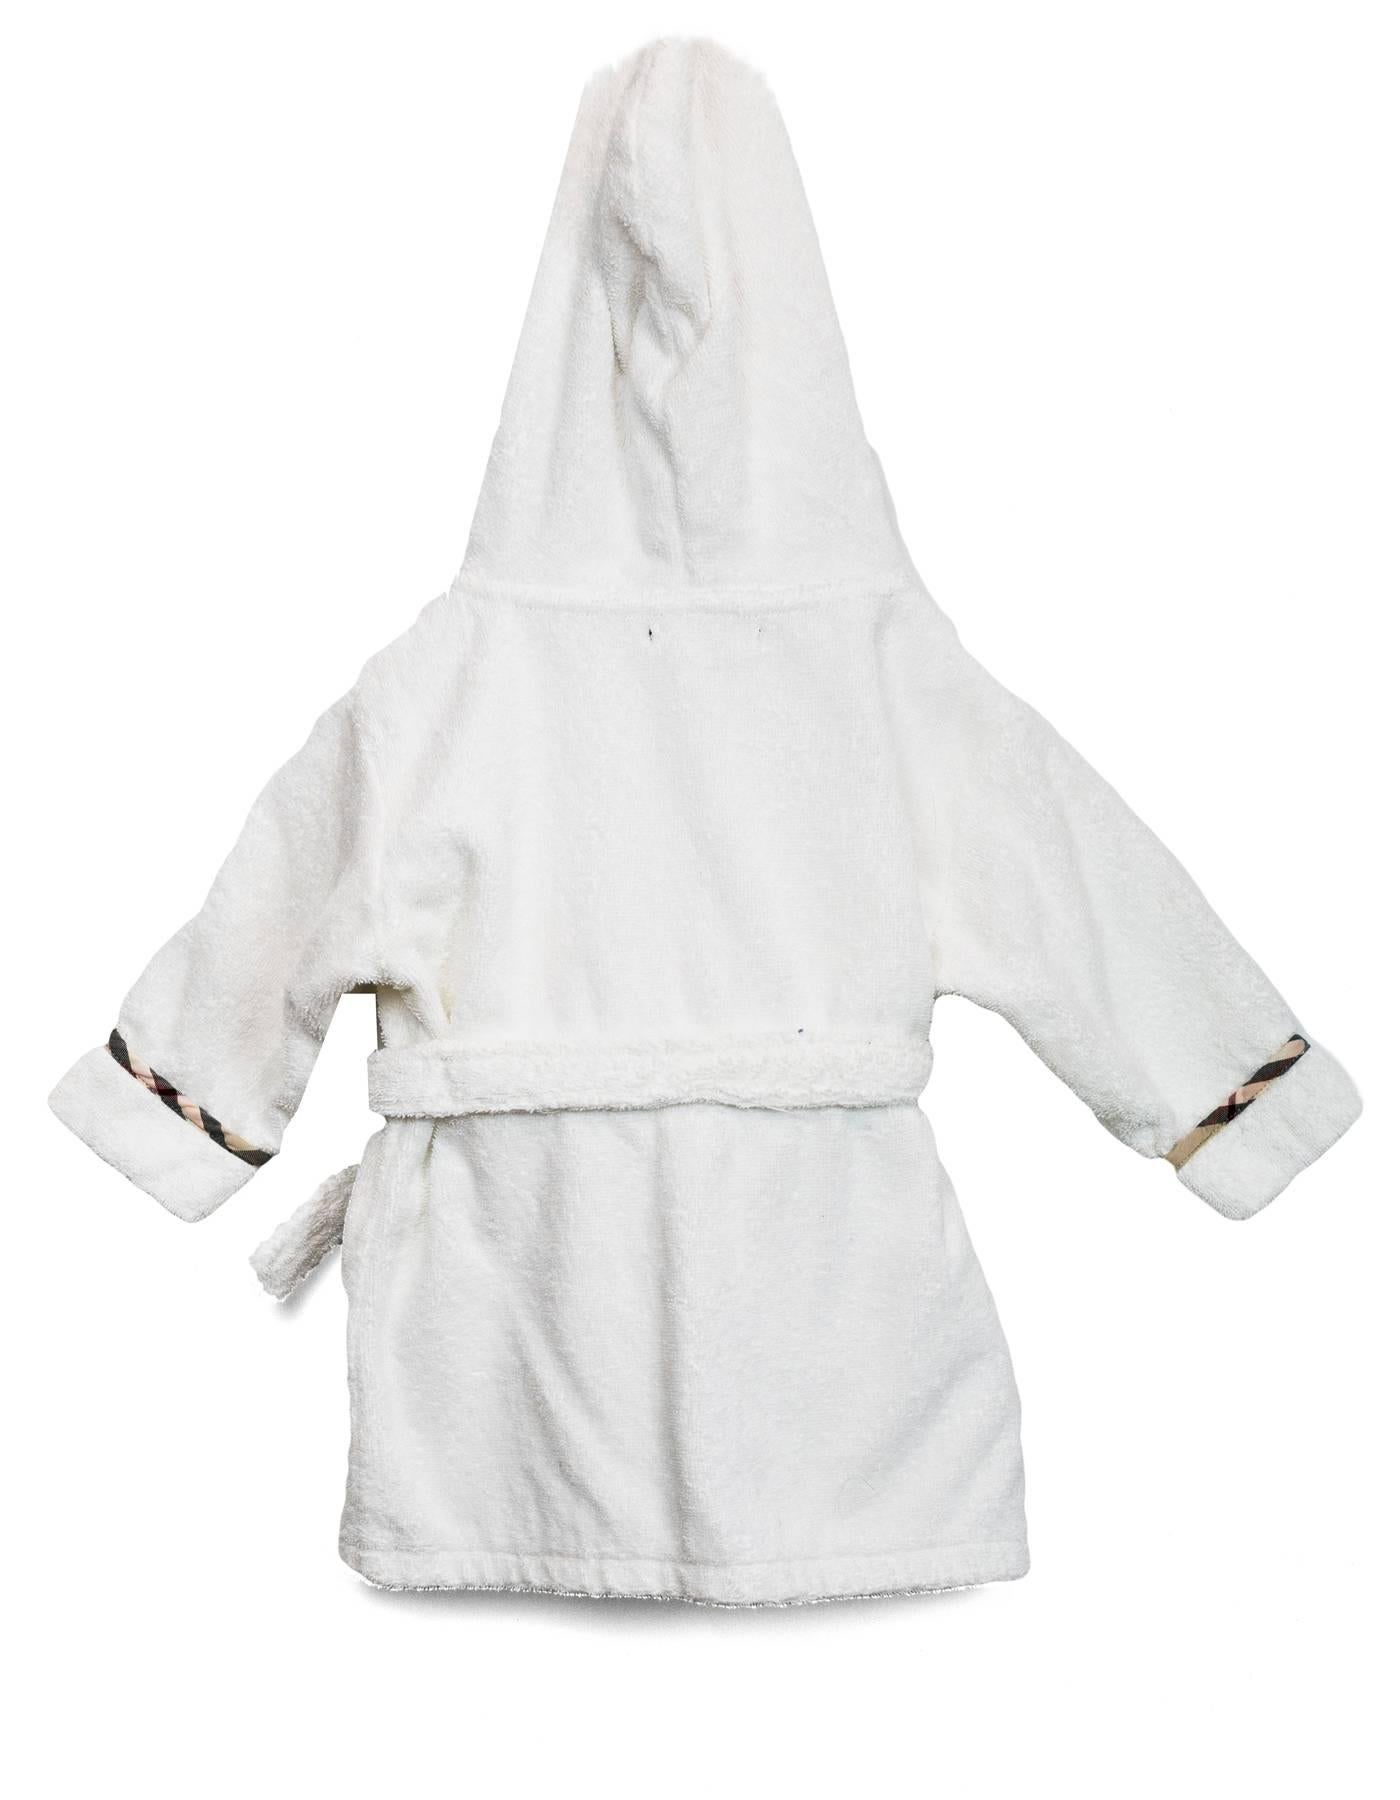 Burberry London White Terrycloth Hooded Children's Robe 
Features nova plaid piping and trim throughout

Color: White, nude, black and red
Composition: Not given- believed to be 100% cotton
Lining: White, believed to be 100% cotton
Closure/Opening: